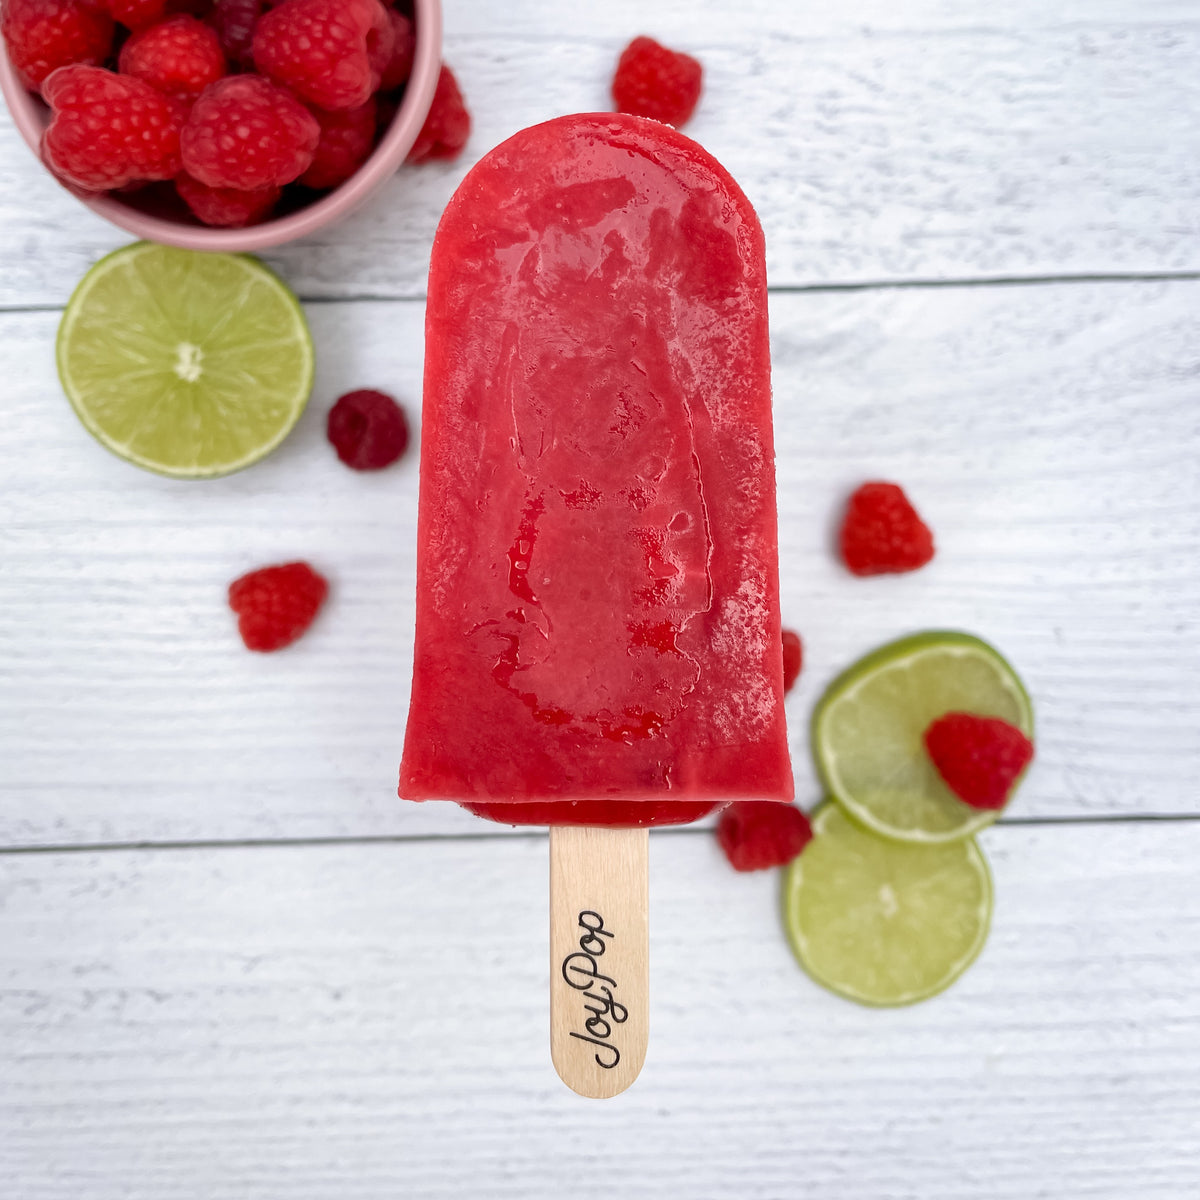 Red raspberry joy pop with a bowl of raspberries and slices of lime on a white wood background